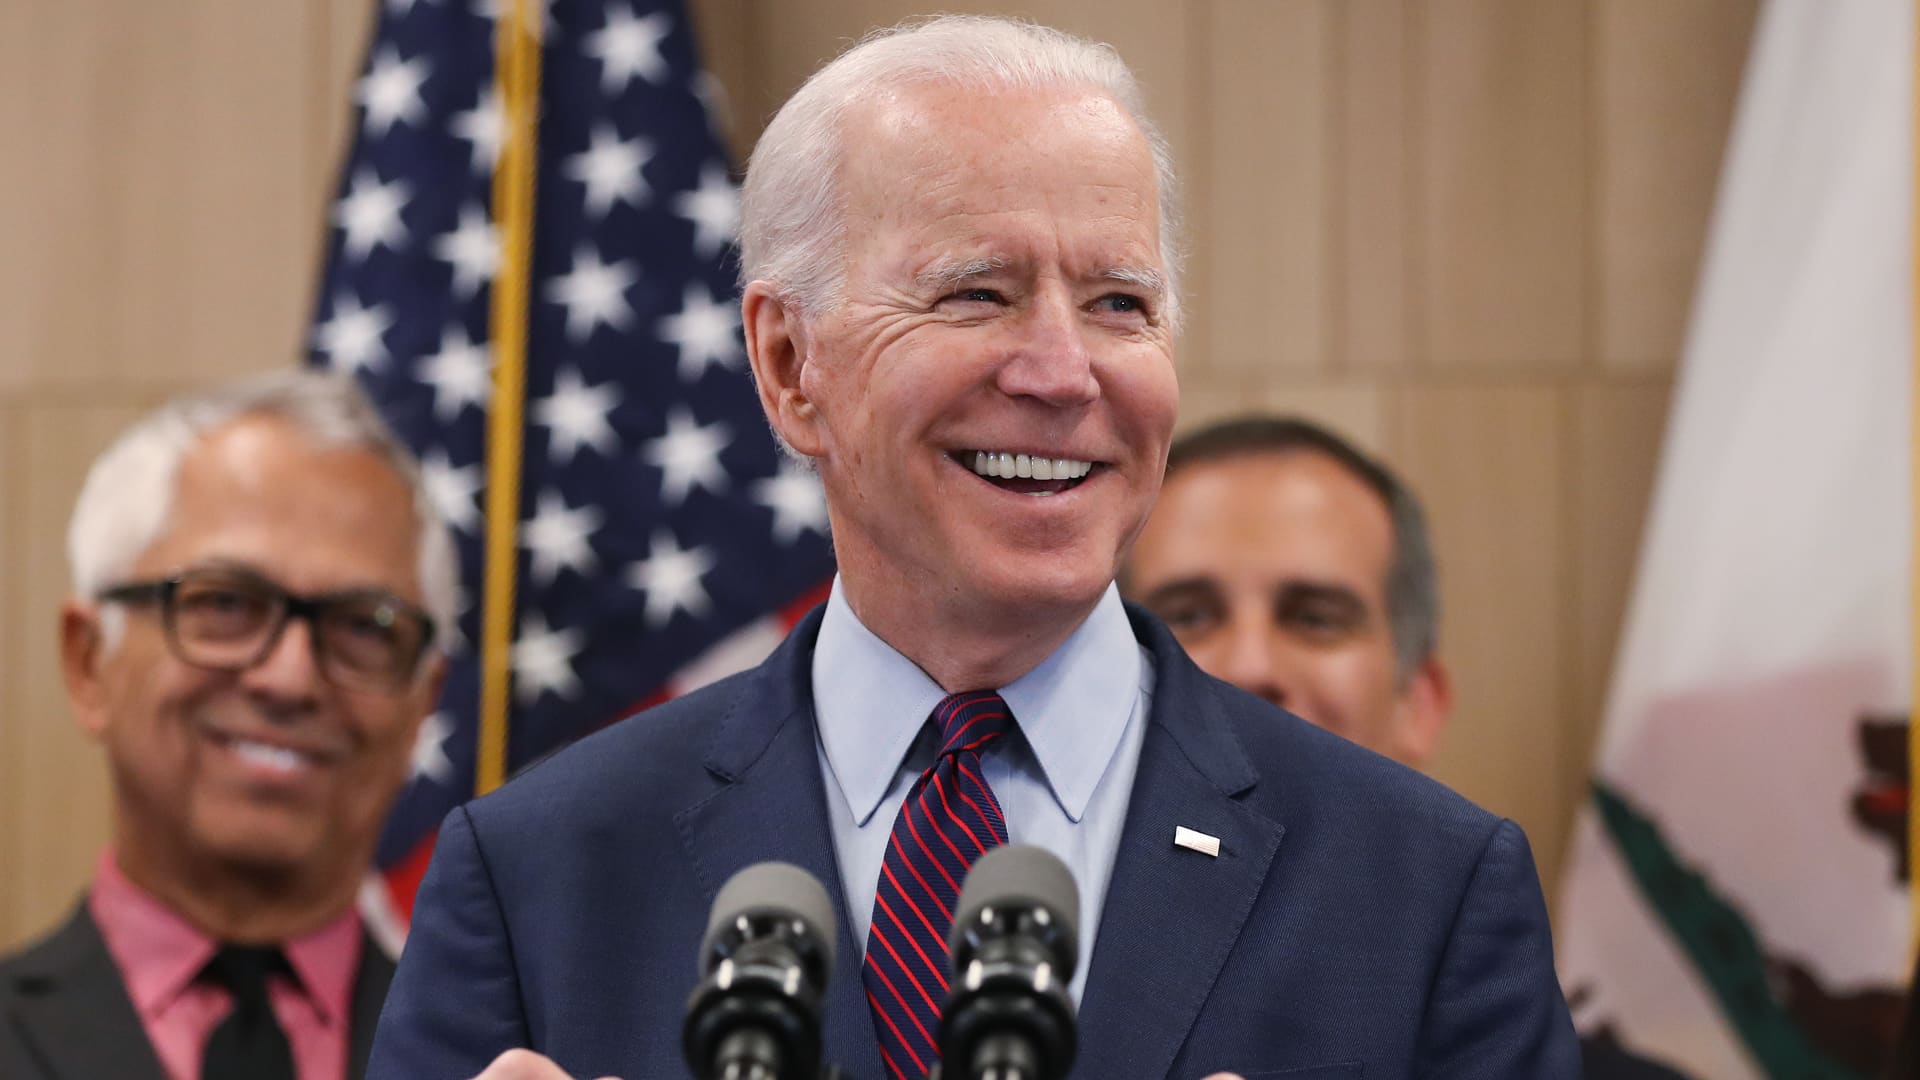 Investment opportunities to consider after Biden’s election win